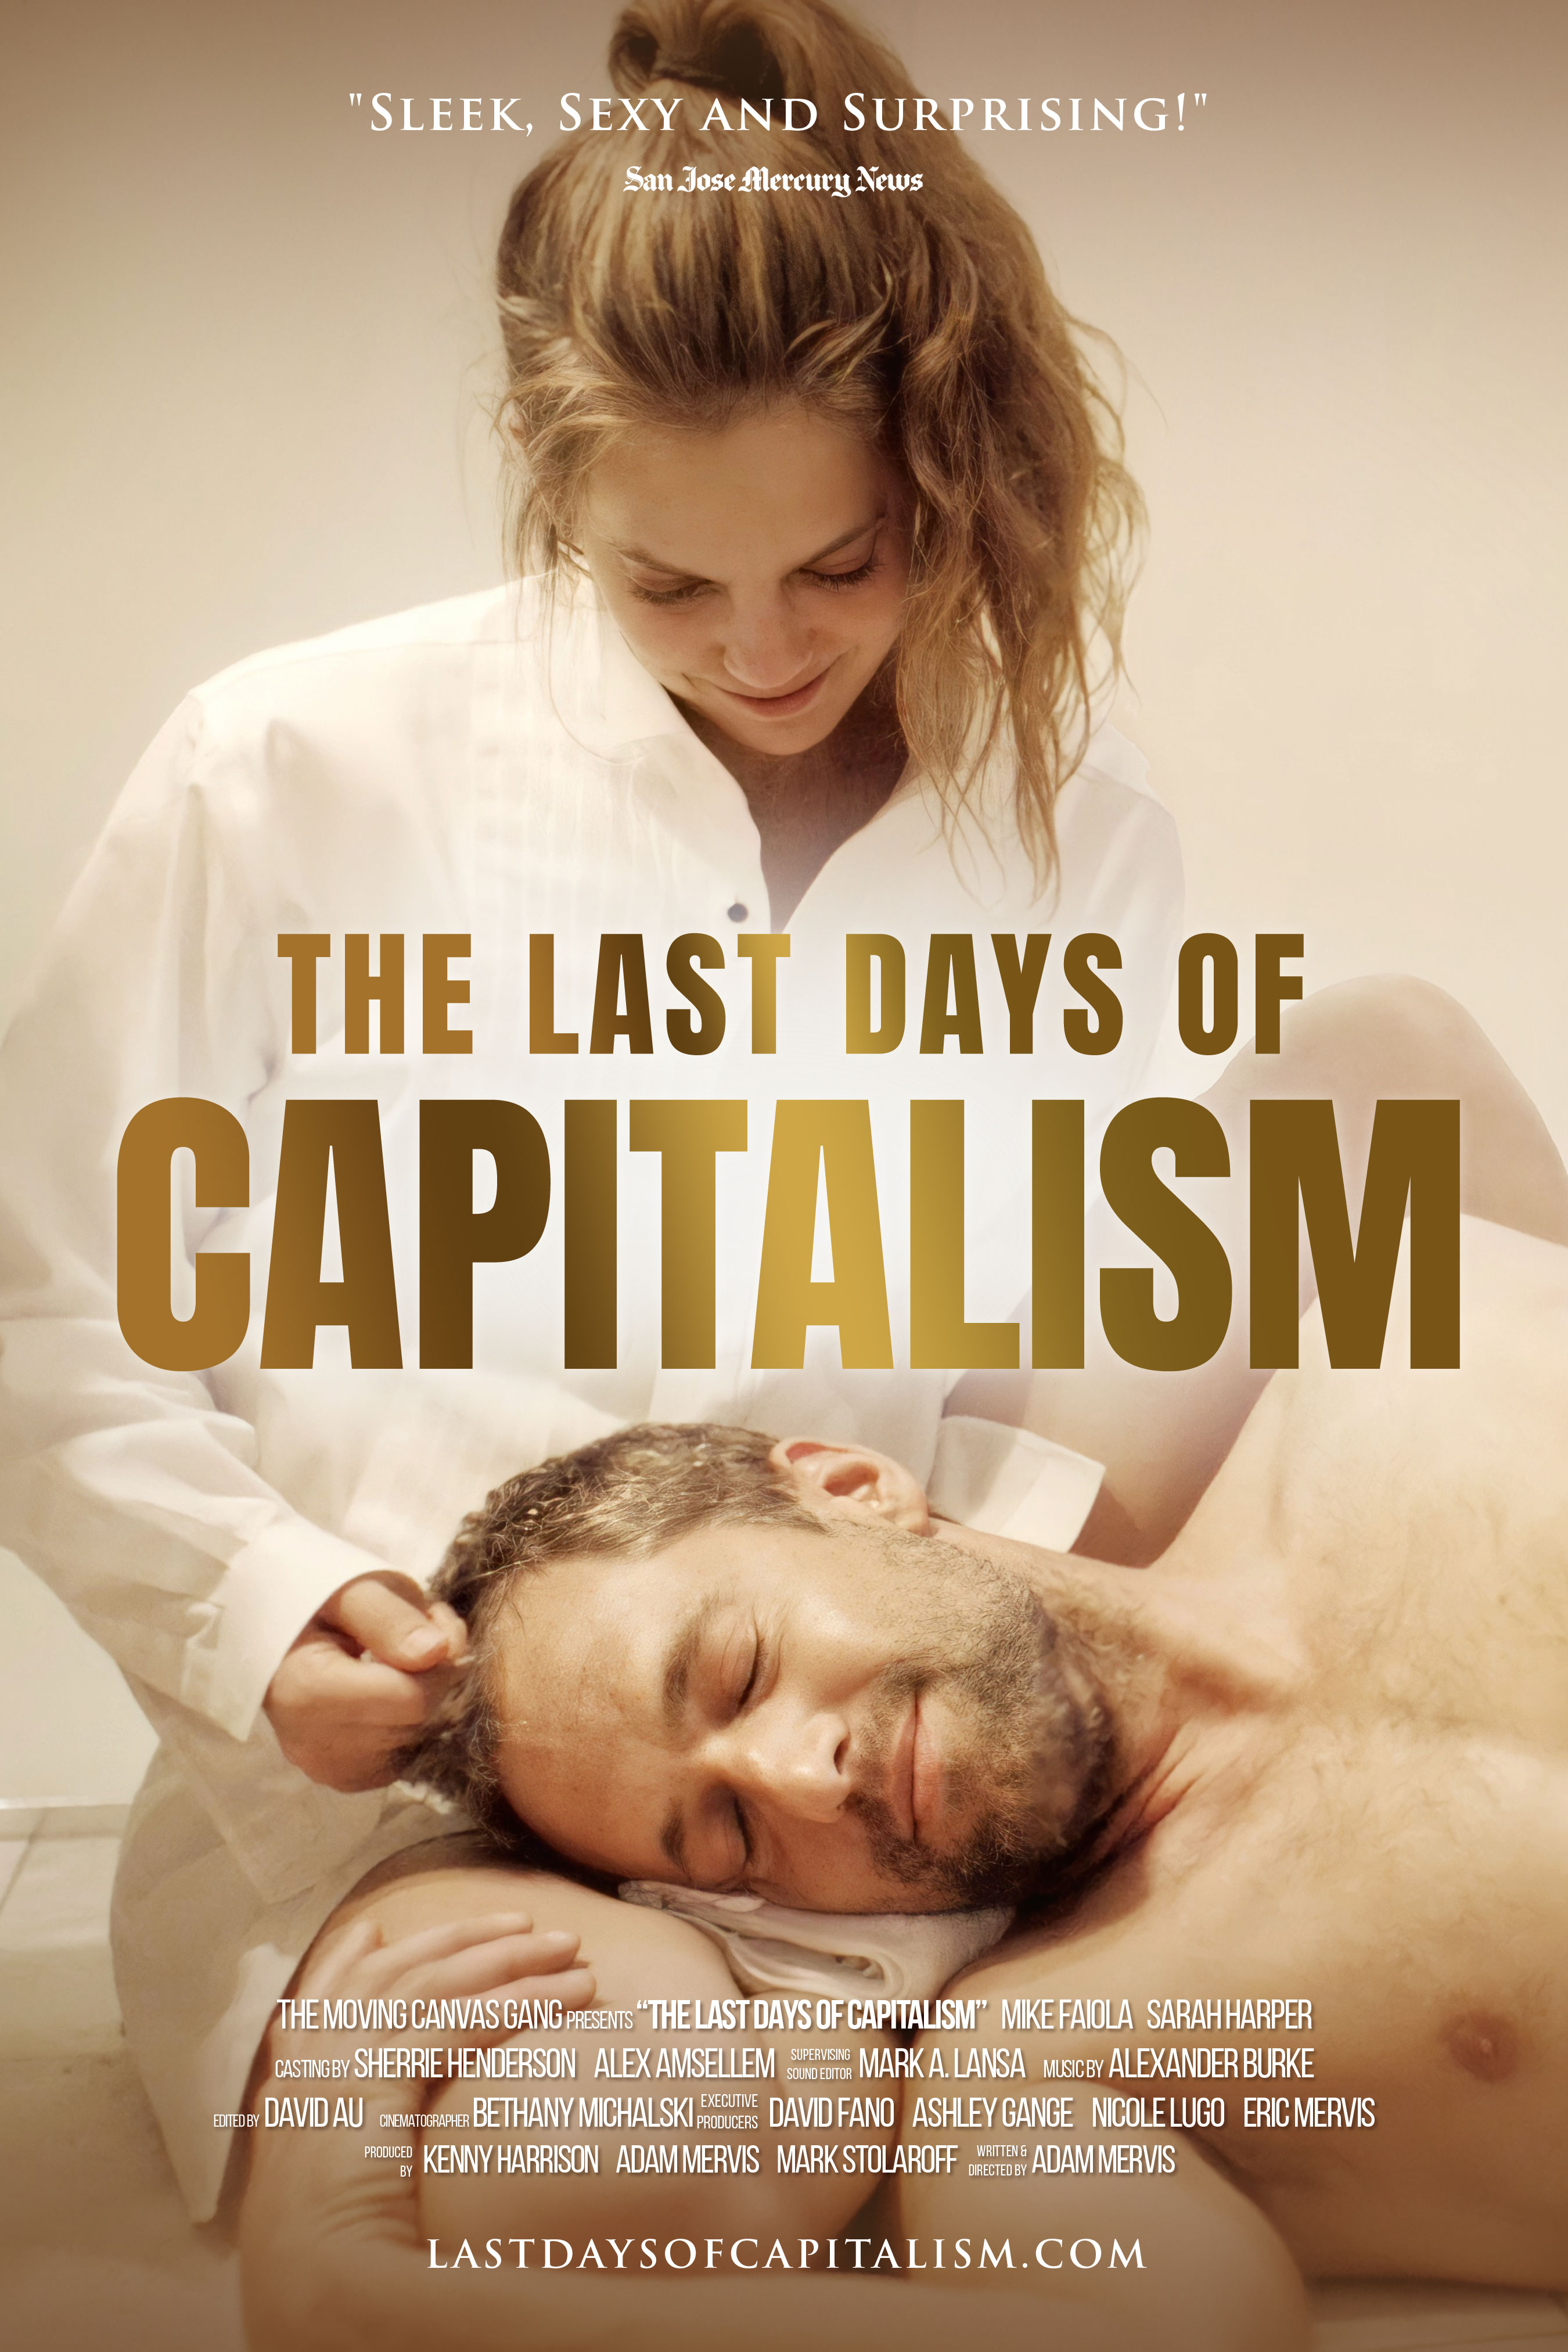 18+ The Last Days of Capitalism 2021 English Movie 1080p HDRip 1.4GB Download